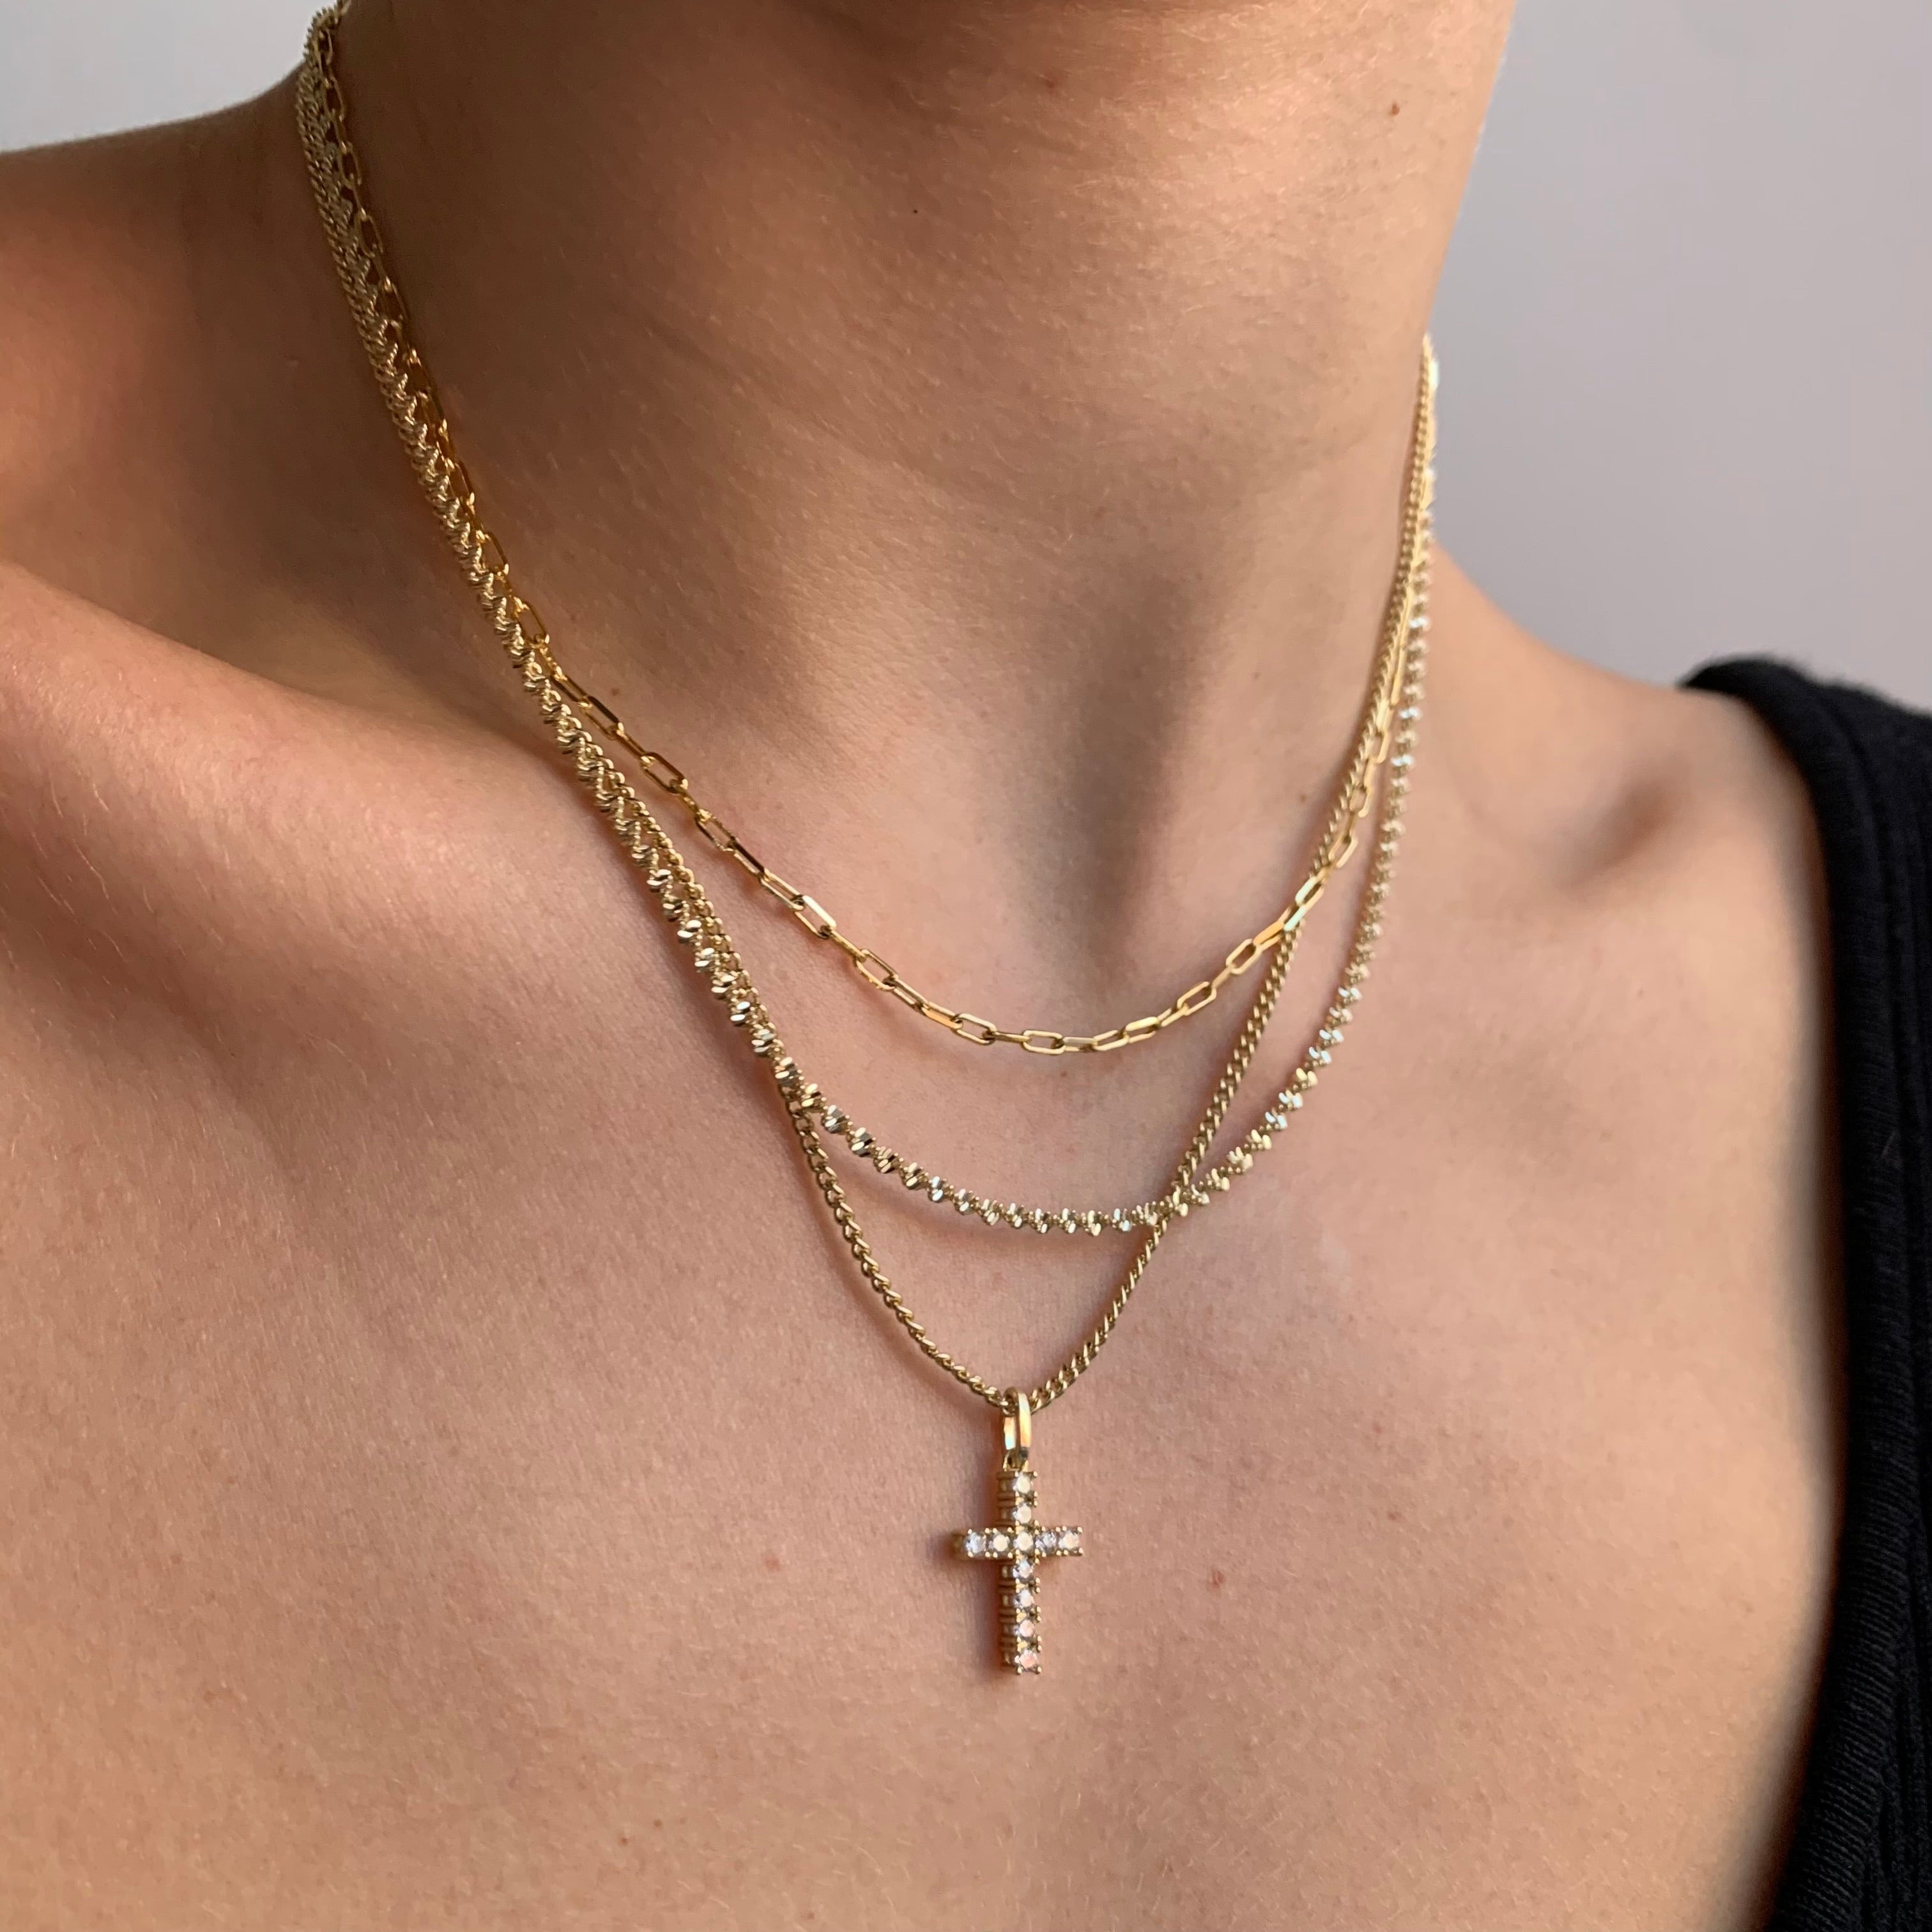 Ronaldo - Love Lifted Me Necklace - 18